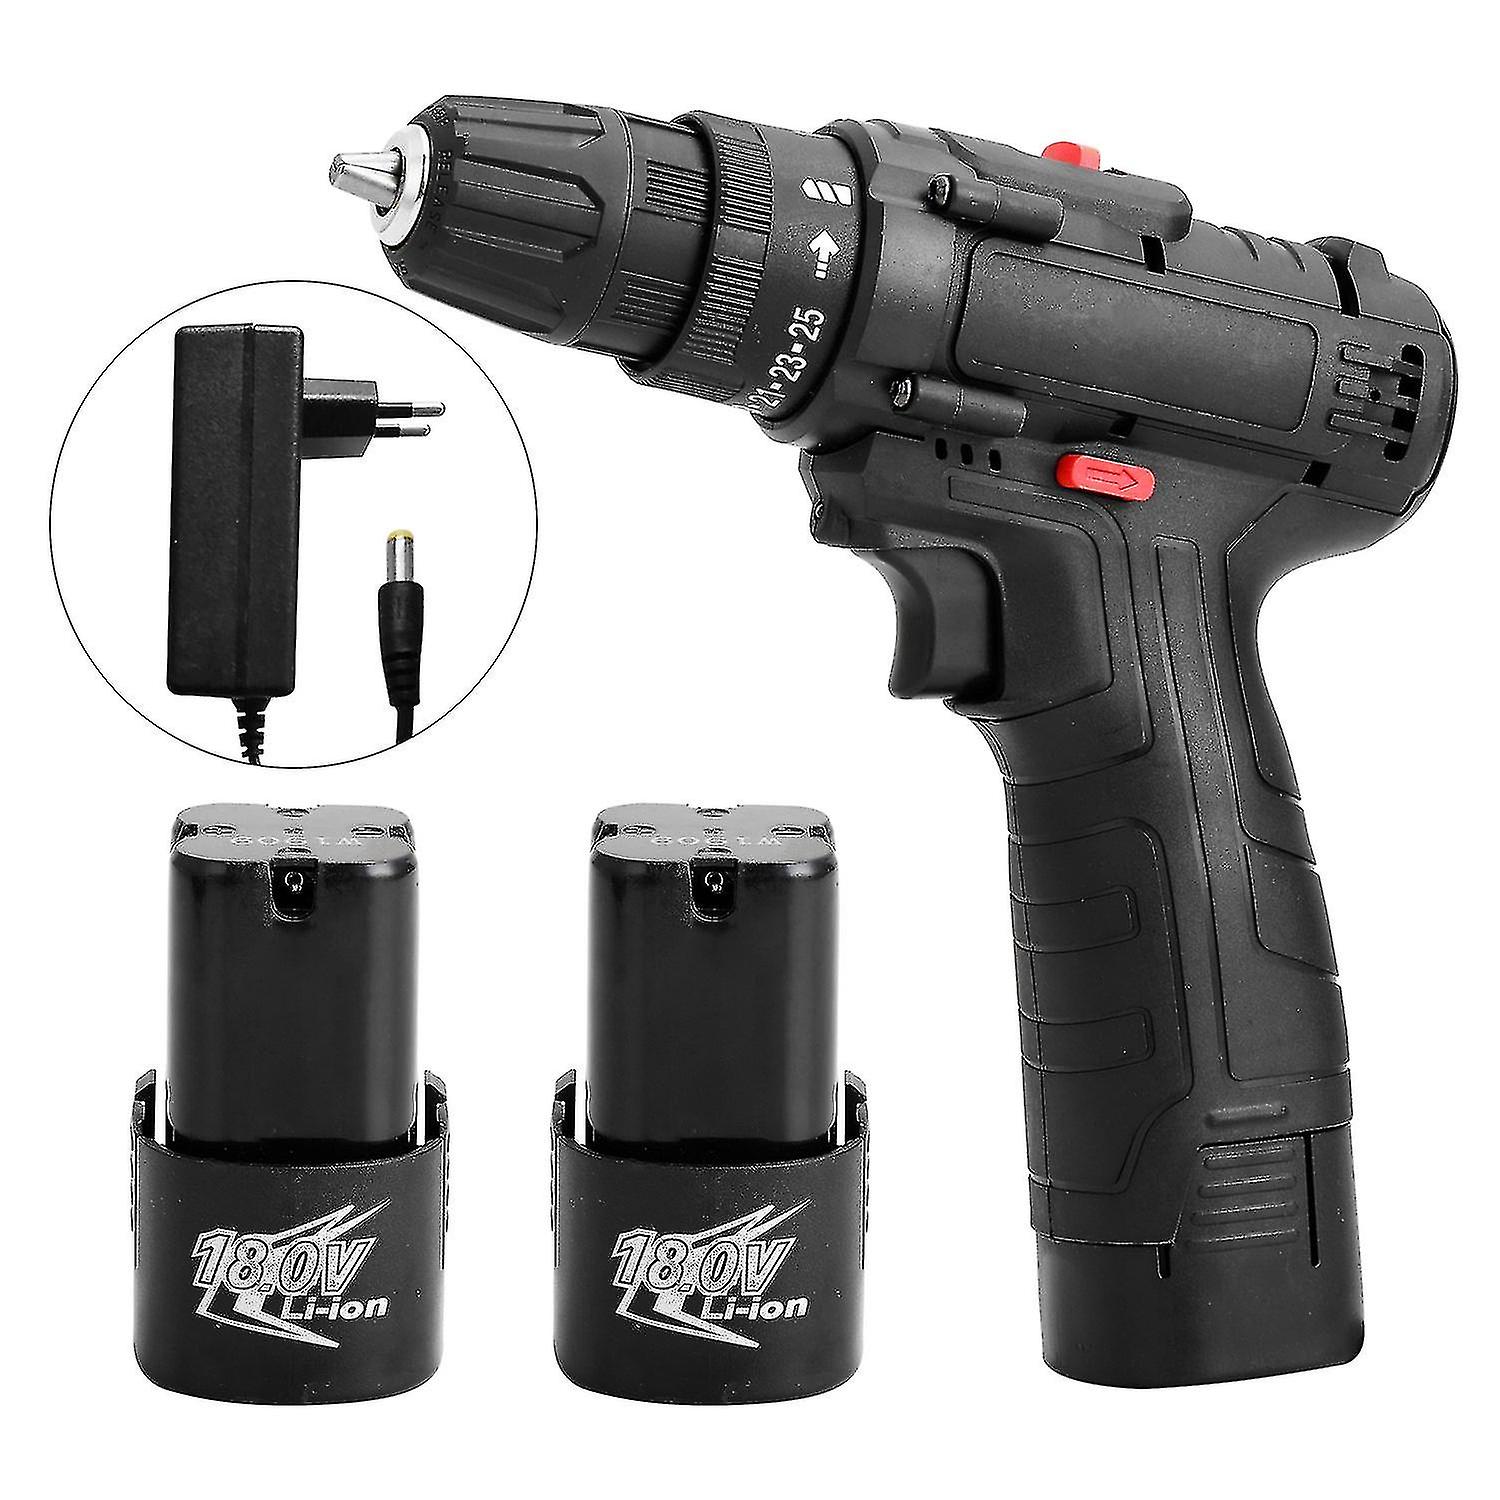 Naiwang 18v Multifunctional Electric Impact Drill High-power Lithium Battery Wireless Rechargeable Hand Drills Home Electric Power Tools